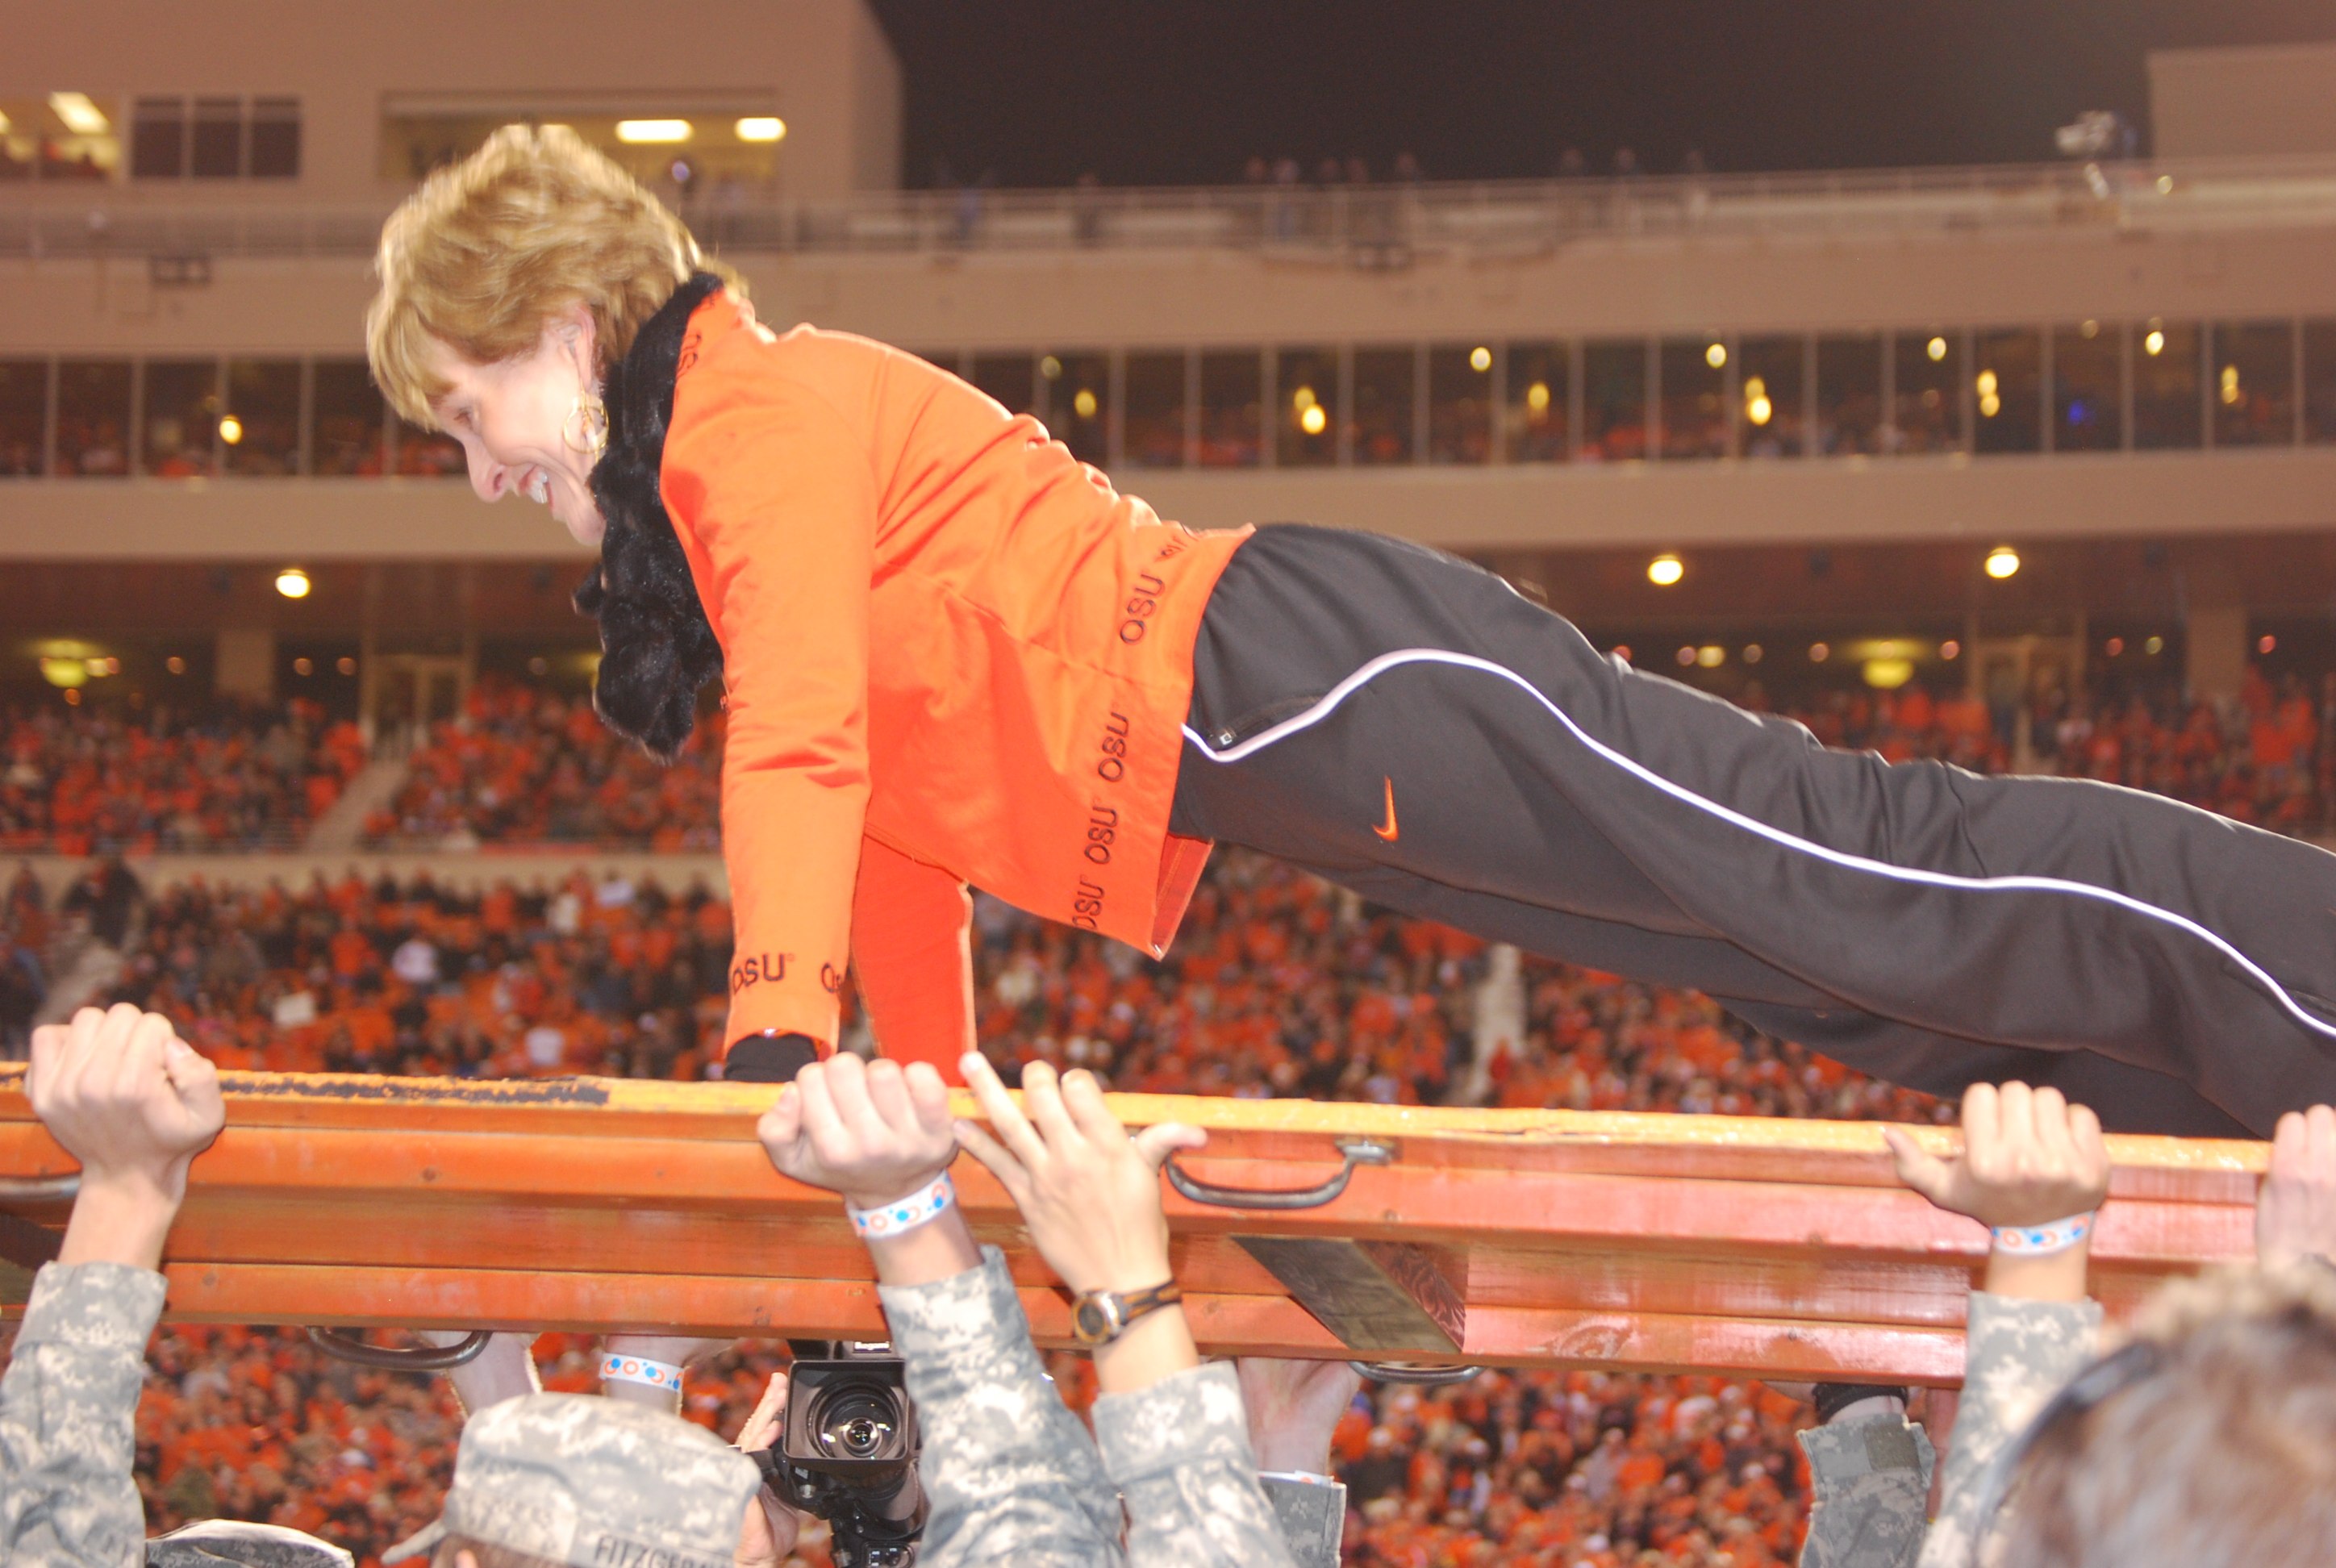 To celebrate the end of the Cowboys on the Move Competition, First Cowgirl Ann Hargis completed the first set of push ups on the ROTC push up board during the bedlam game.